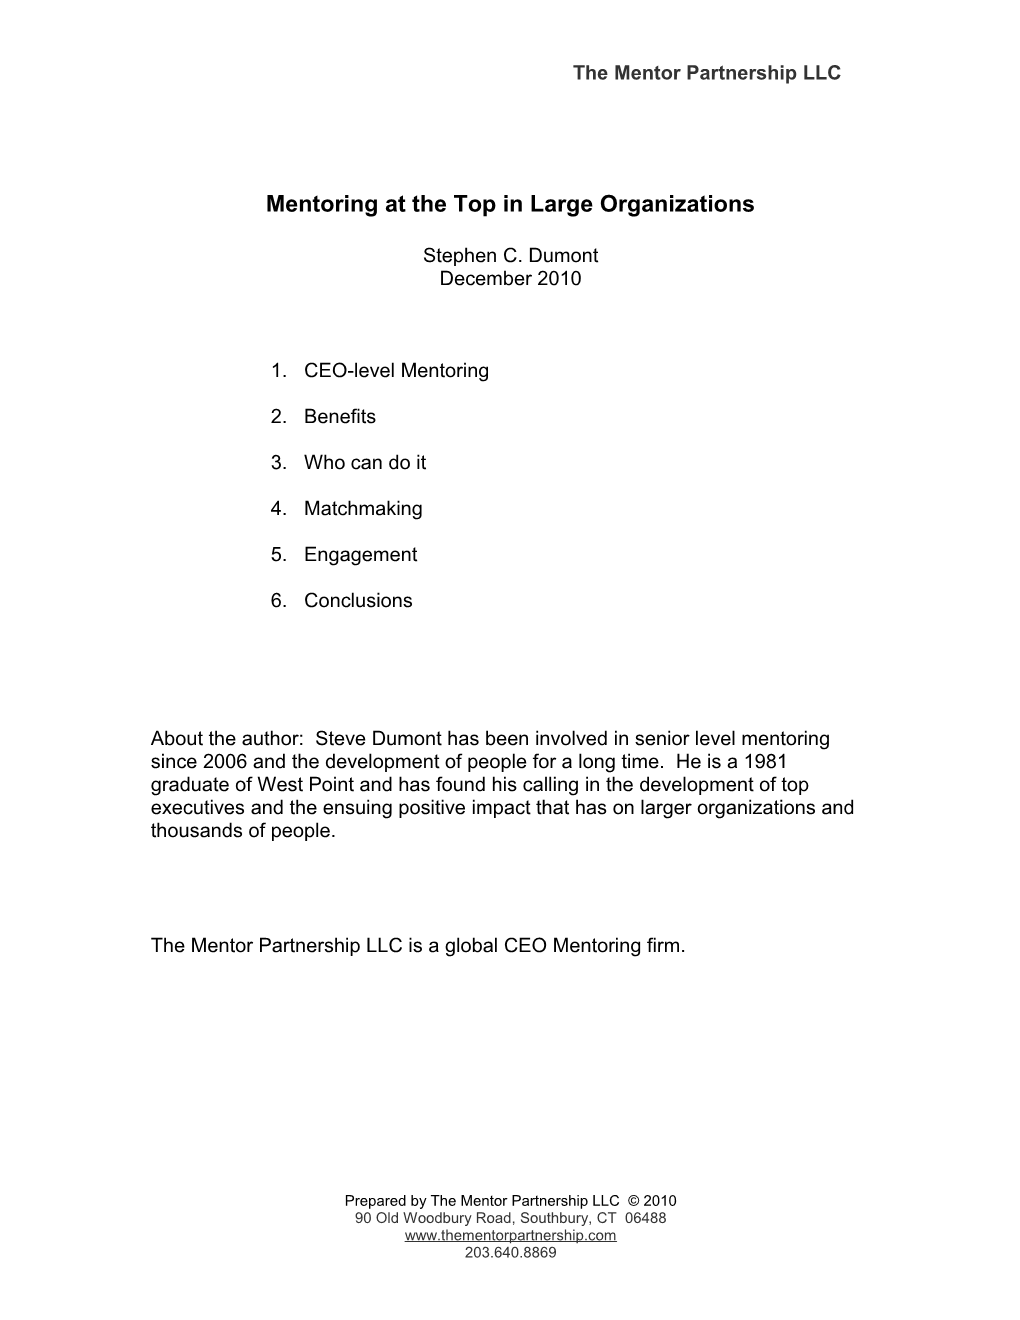 Mentoring at the Top in Large Organizations